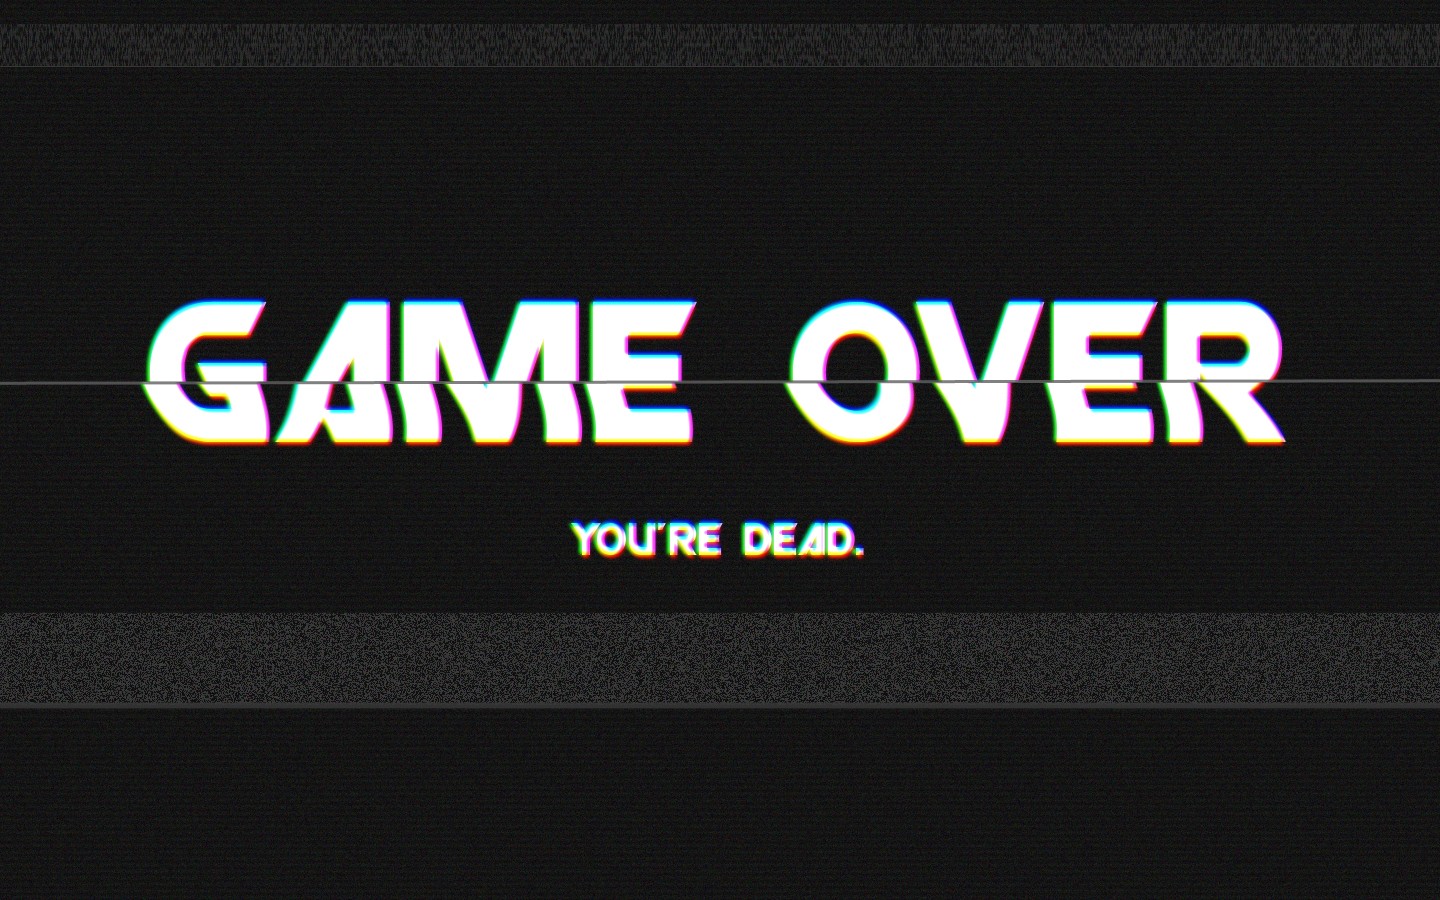 General 1440x900 GAME OVER video games glitch art video game art PC gaming